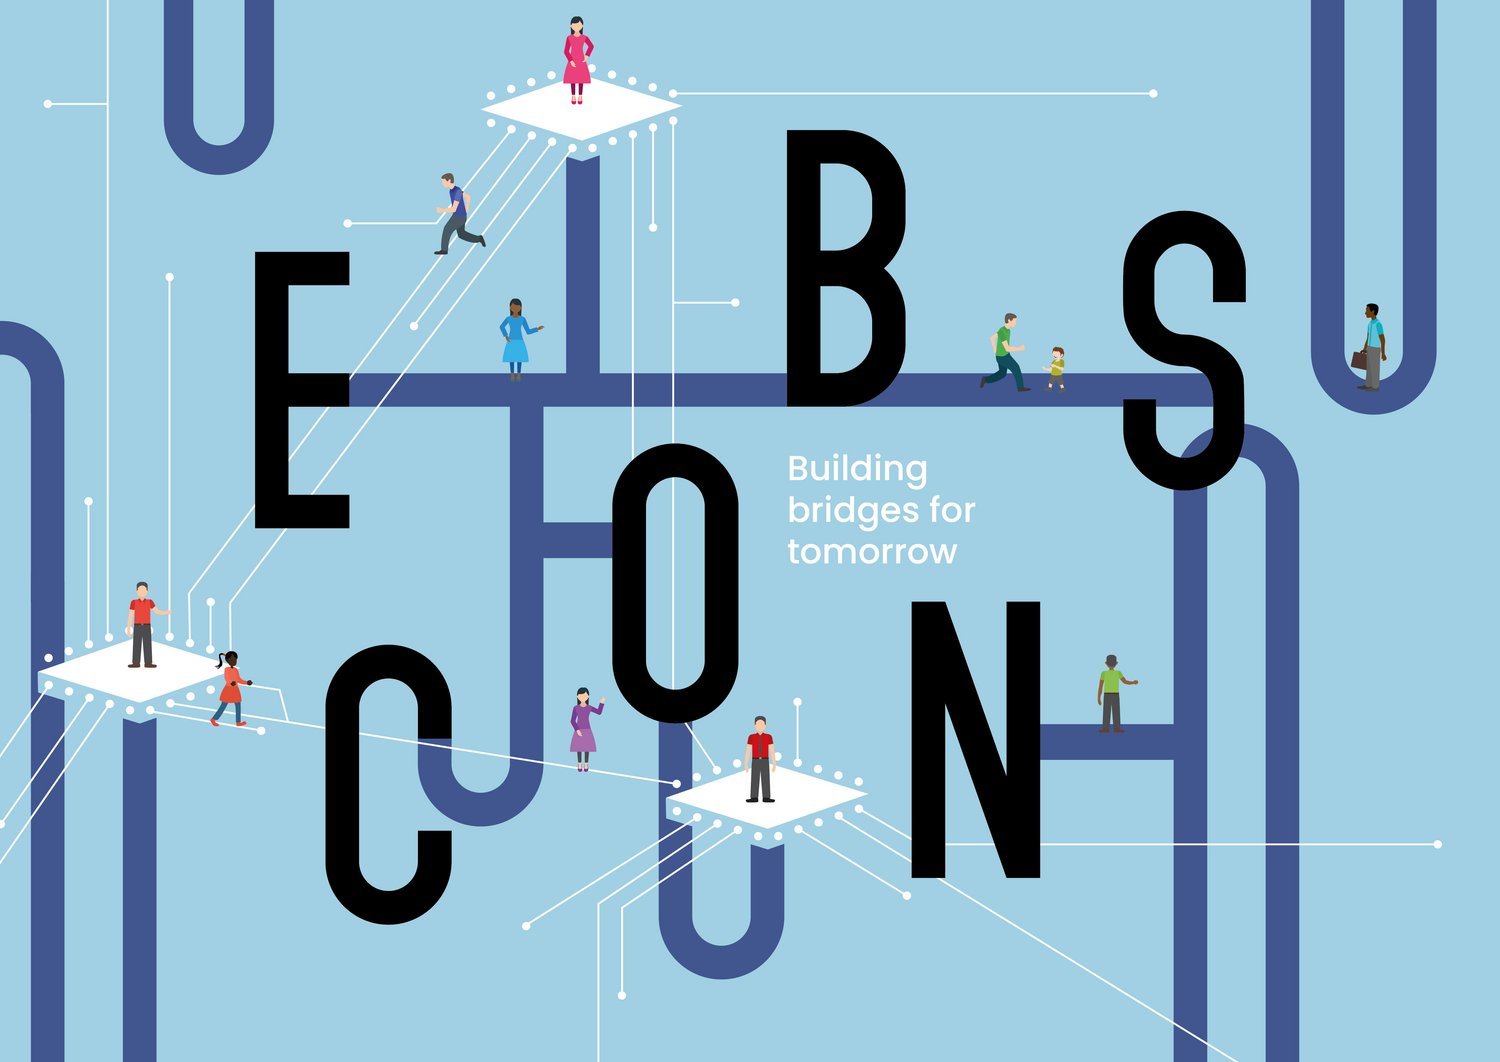 design of the EBSCON 2021: dark blue networks on a light blue background, cartoon people walking on those networks, text: "EBSCON, Building Bridges for Tomorrow"